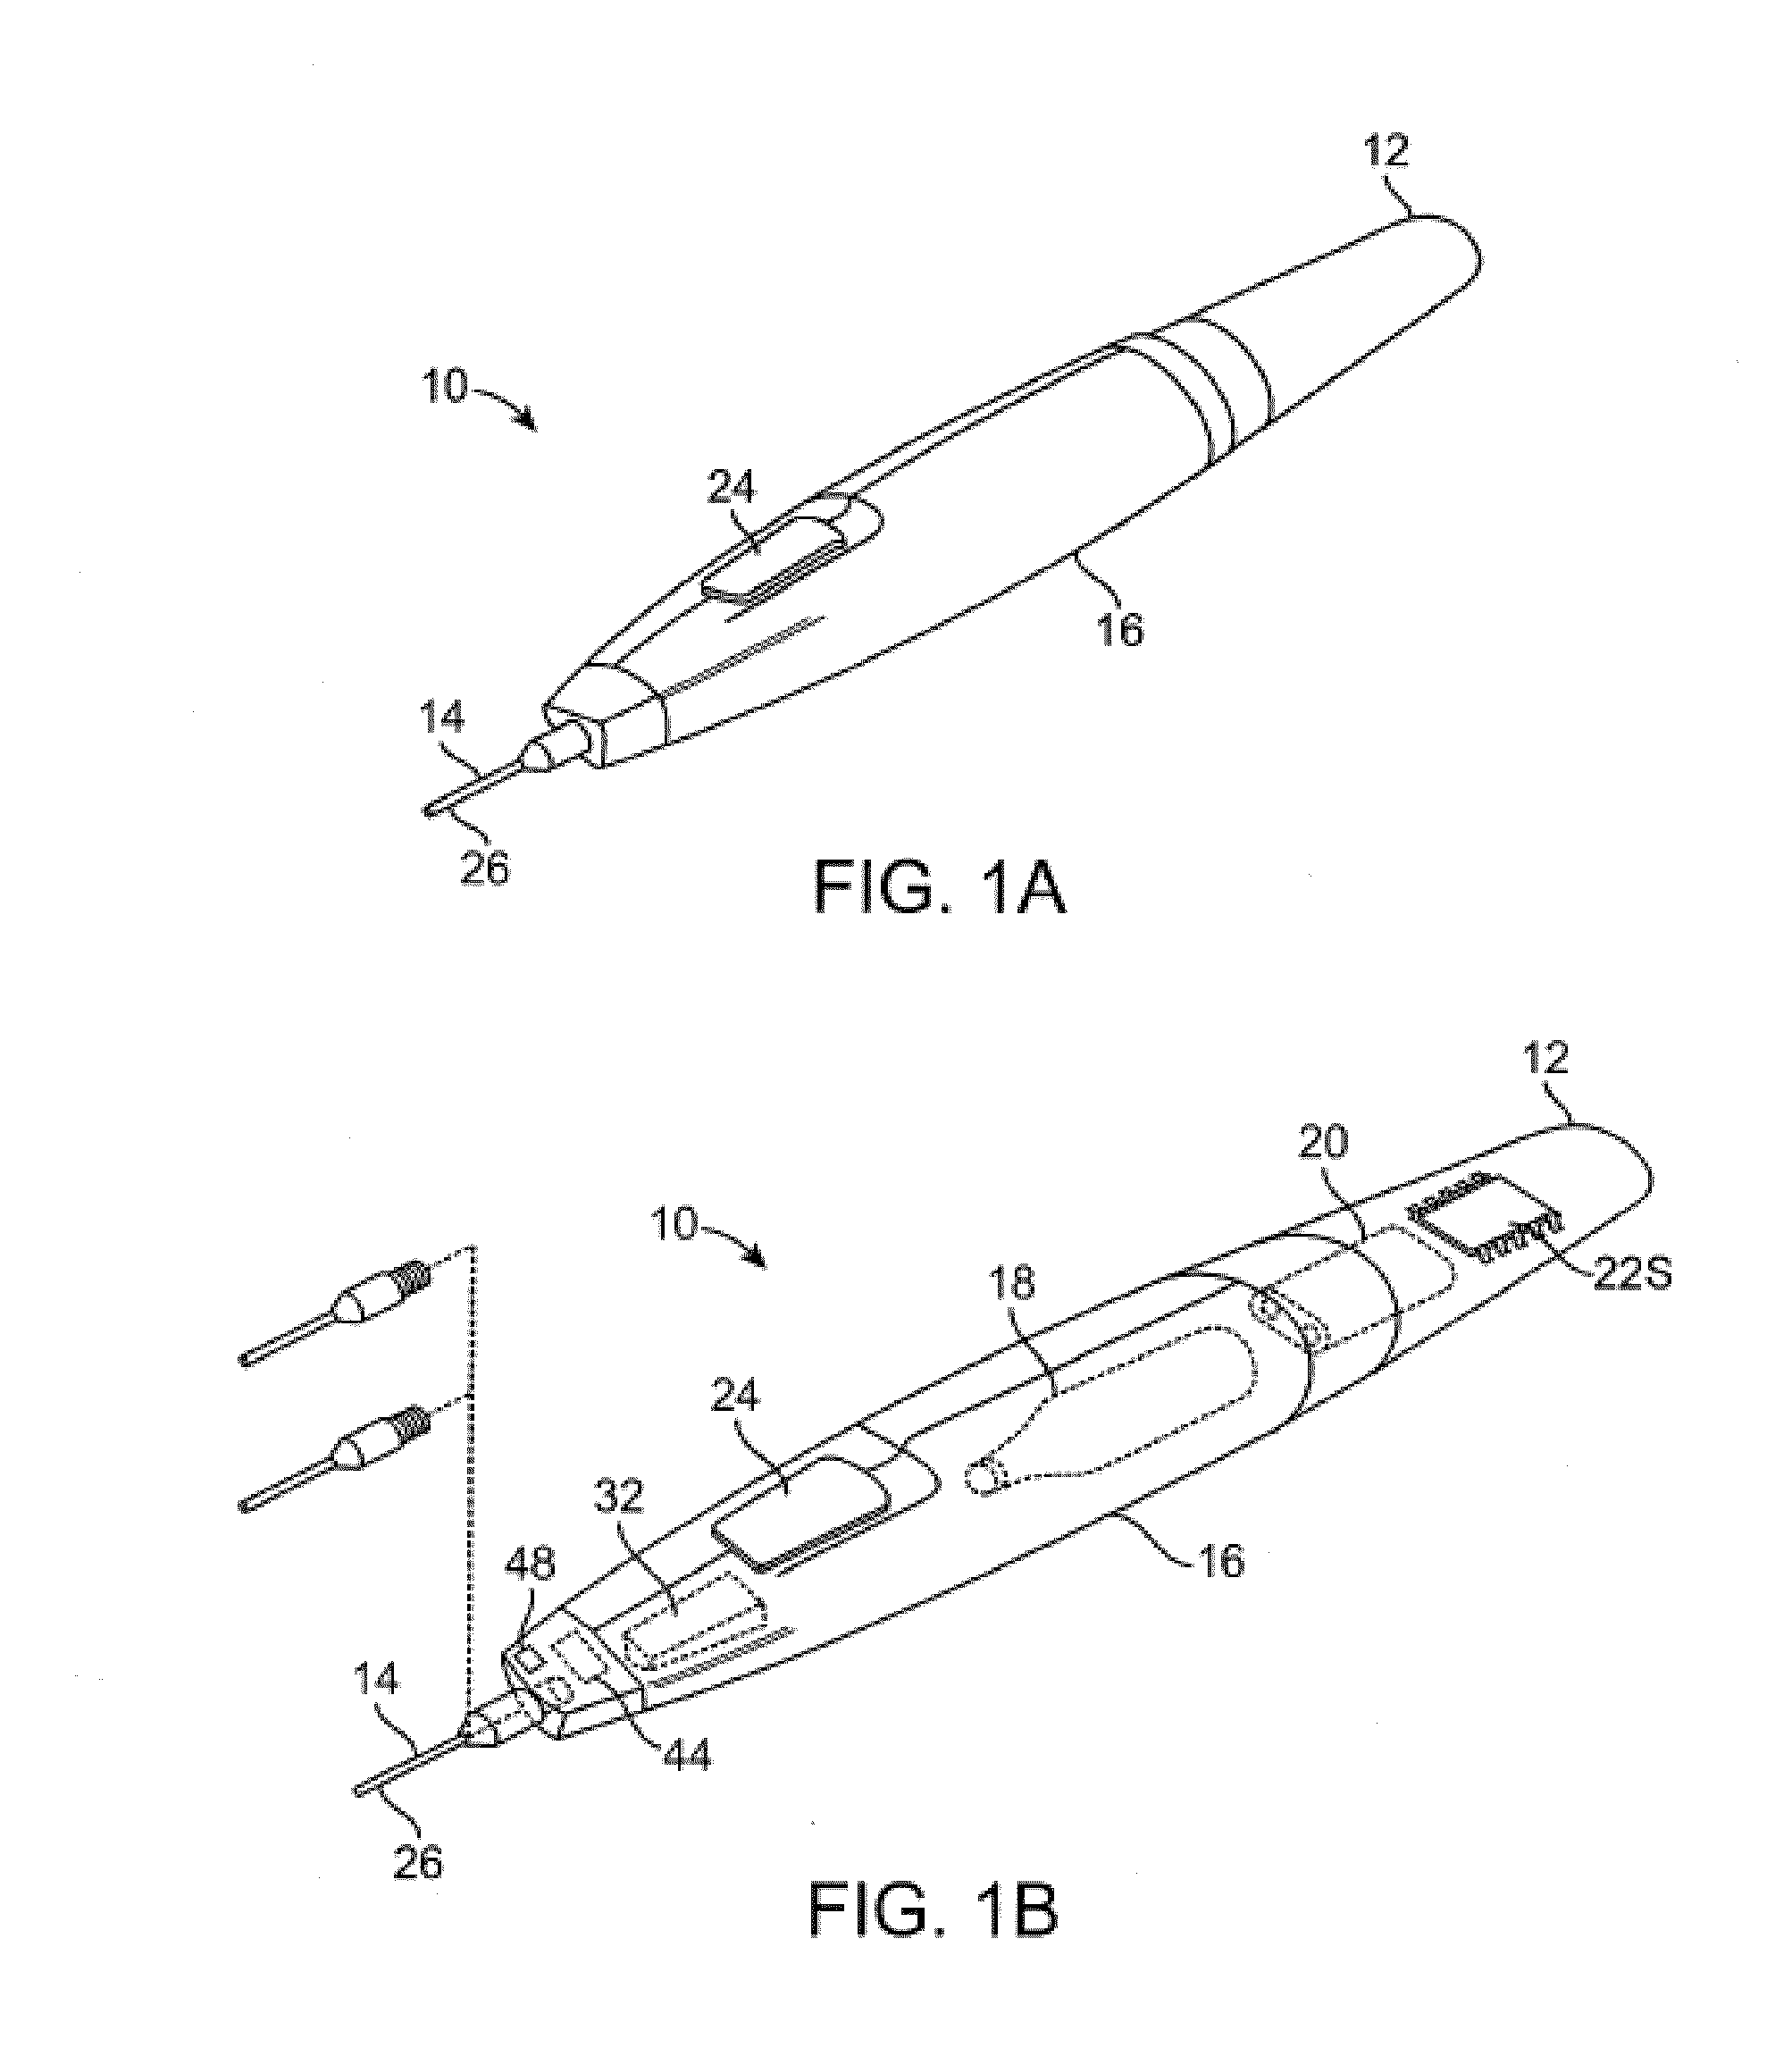 Methods and Systems for Treatment of Spasticity